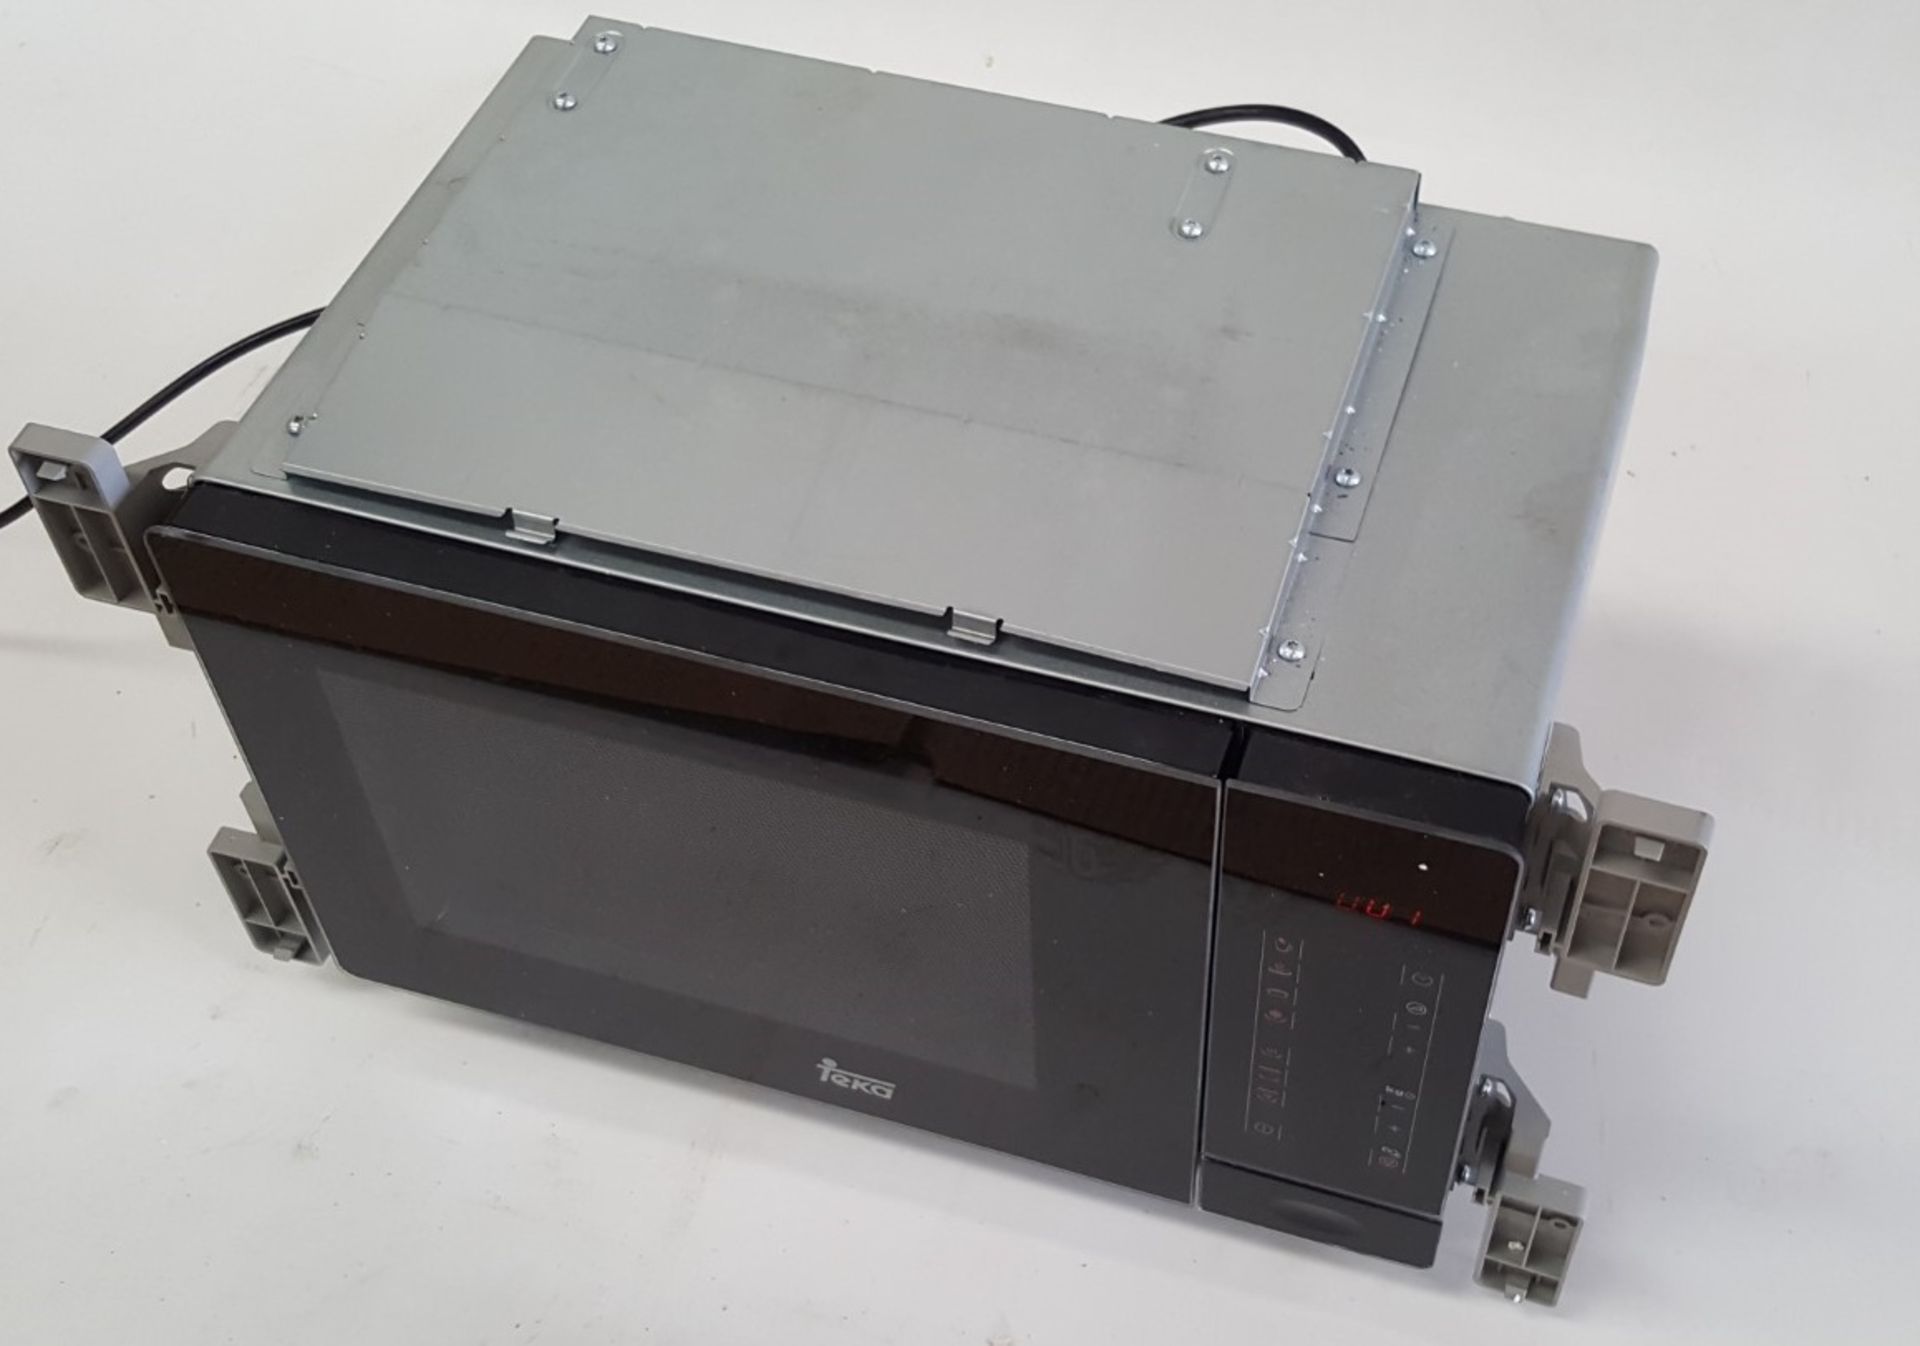 1 x Teka MWL 20 BIT Built-in Microwave - Ref BY158 - Image 3 of 5